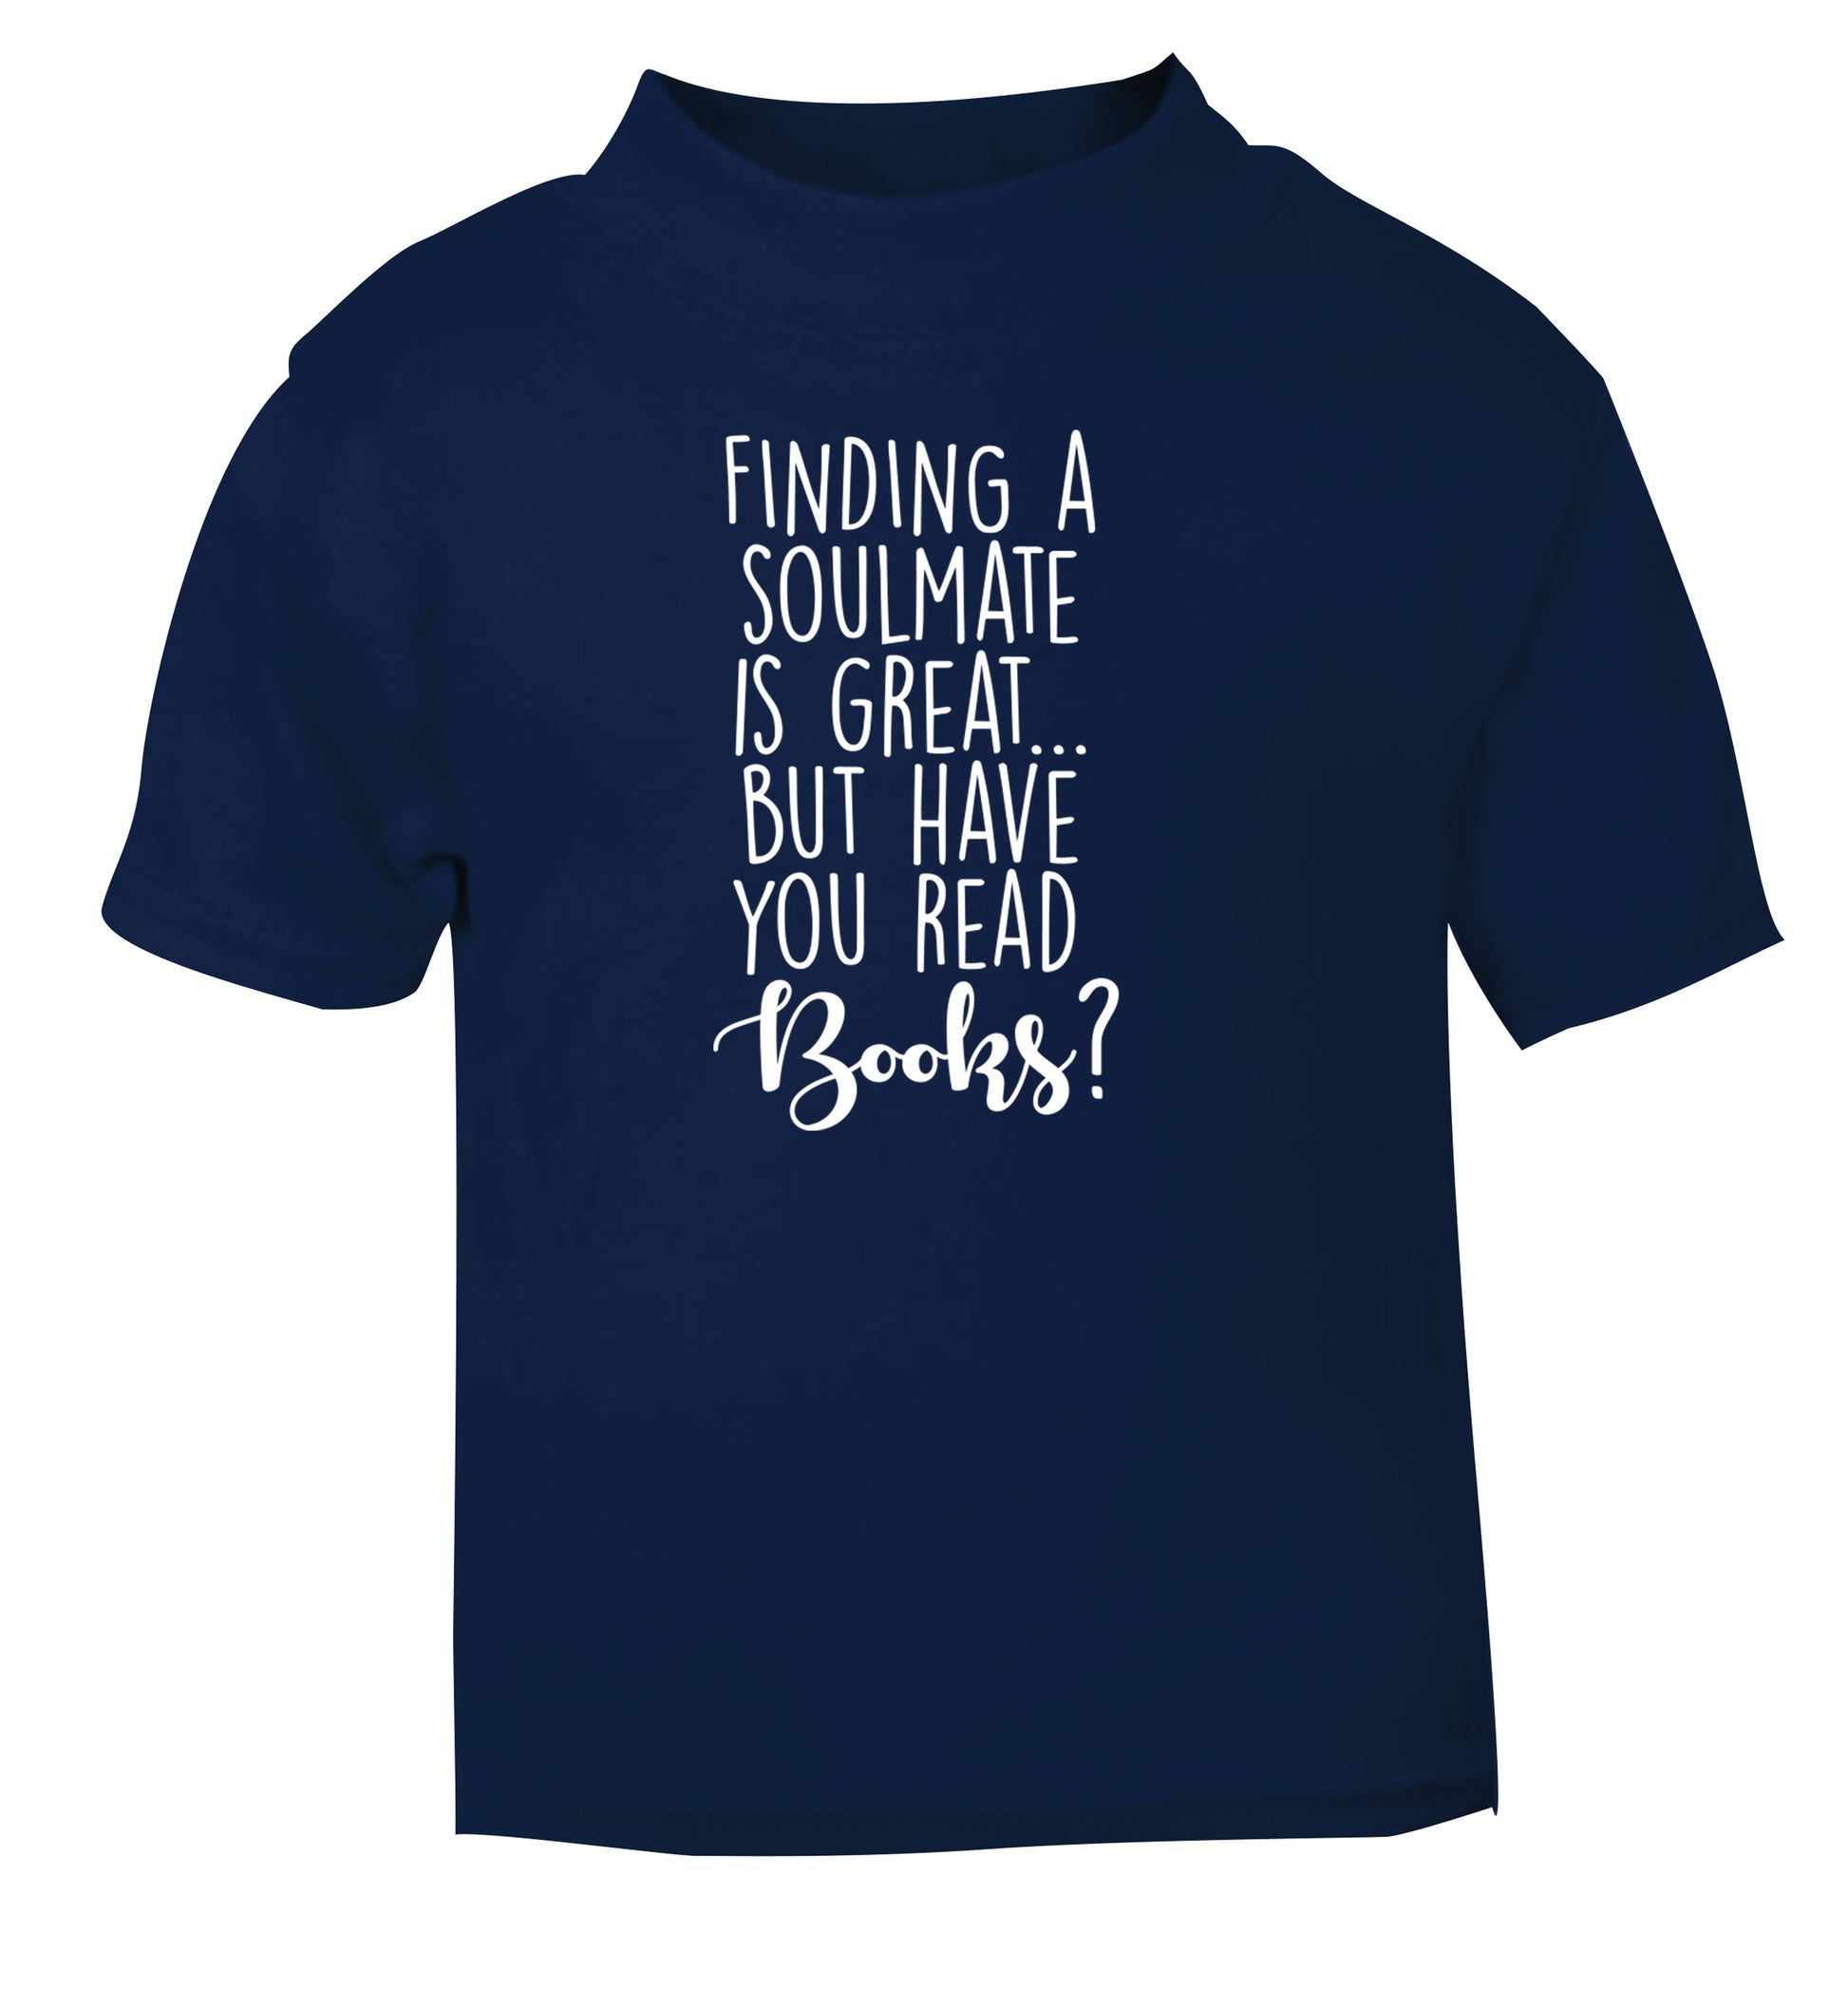 Finding a soulmate is great but have you read books? navy Baby Toddler Tshirt 2 Years